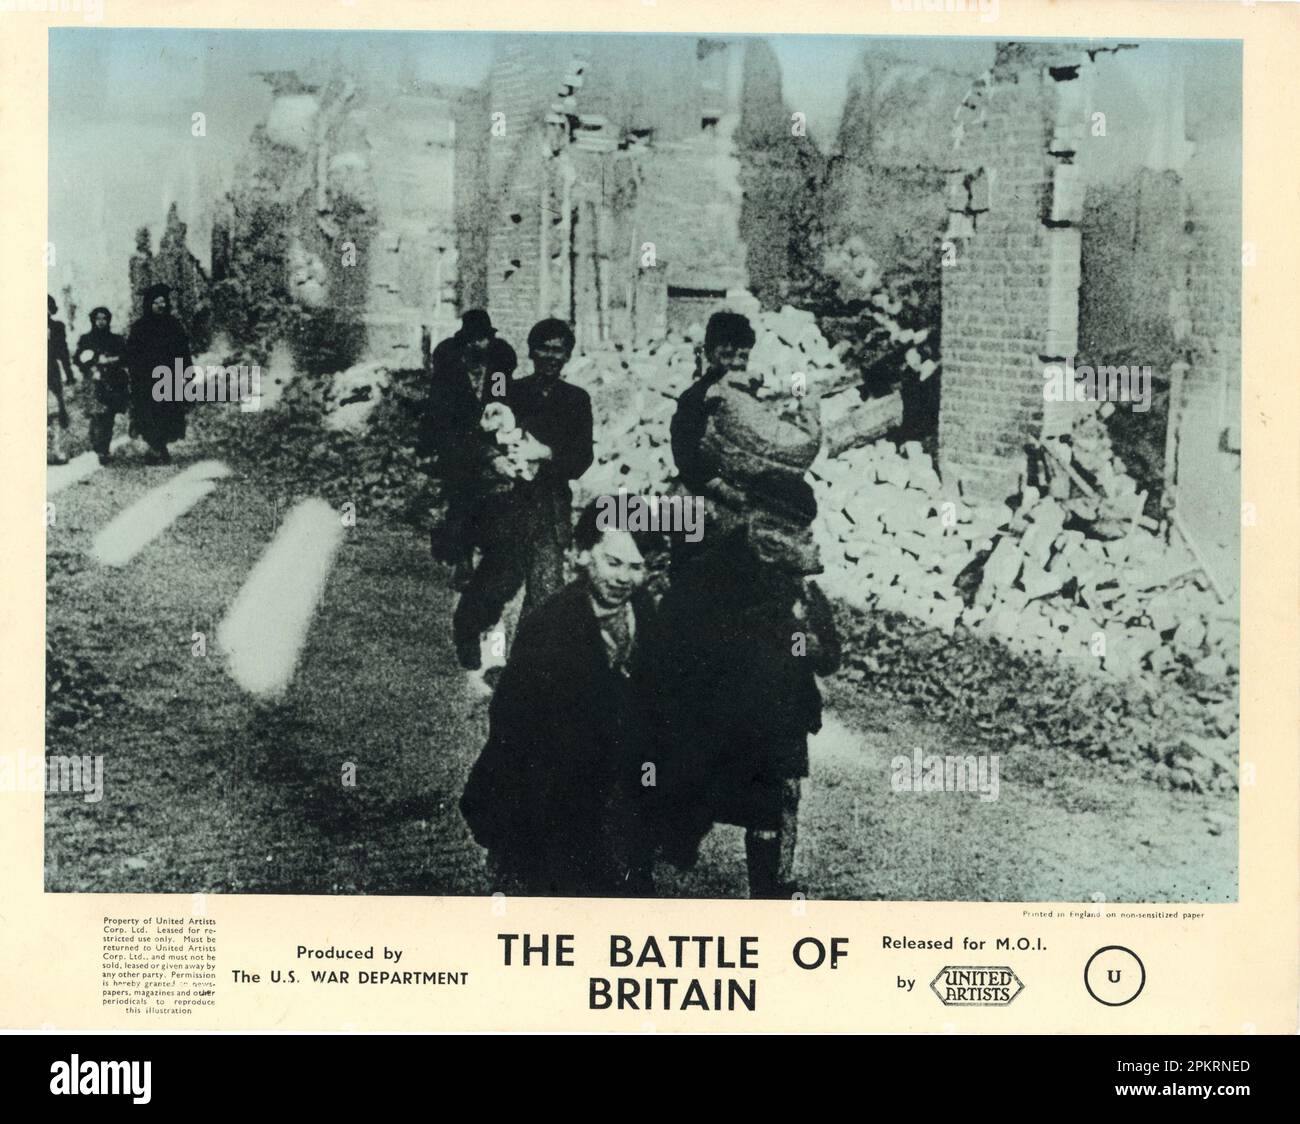 Homeless Children on Bomb Damaged London Street in Propaganda Documentary in the WHY WE FIGHT series THE BATTLE OF BRITAIN 1943 directors FRANK CAPRA and ANTHONY VEILLER writers Julian J. Epstein and Philip G. Epstein narrator Walter Huston producer Frank Capra U.S. War Department/ Ministry of Information (M.O.I.)  / United Artists Stock Photo